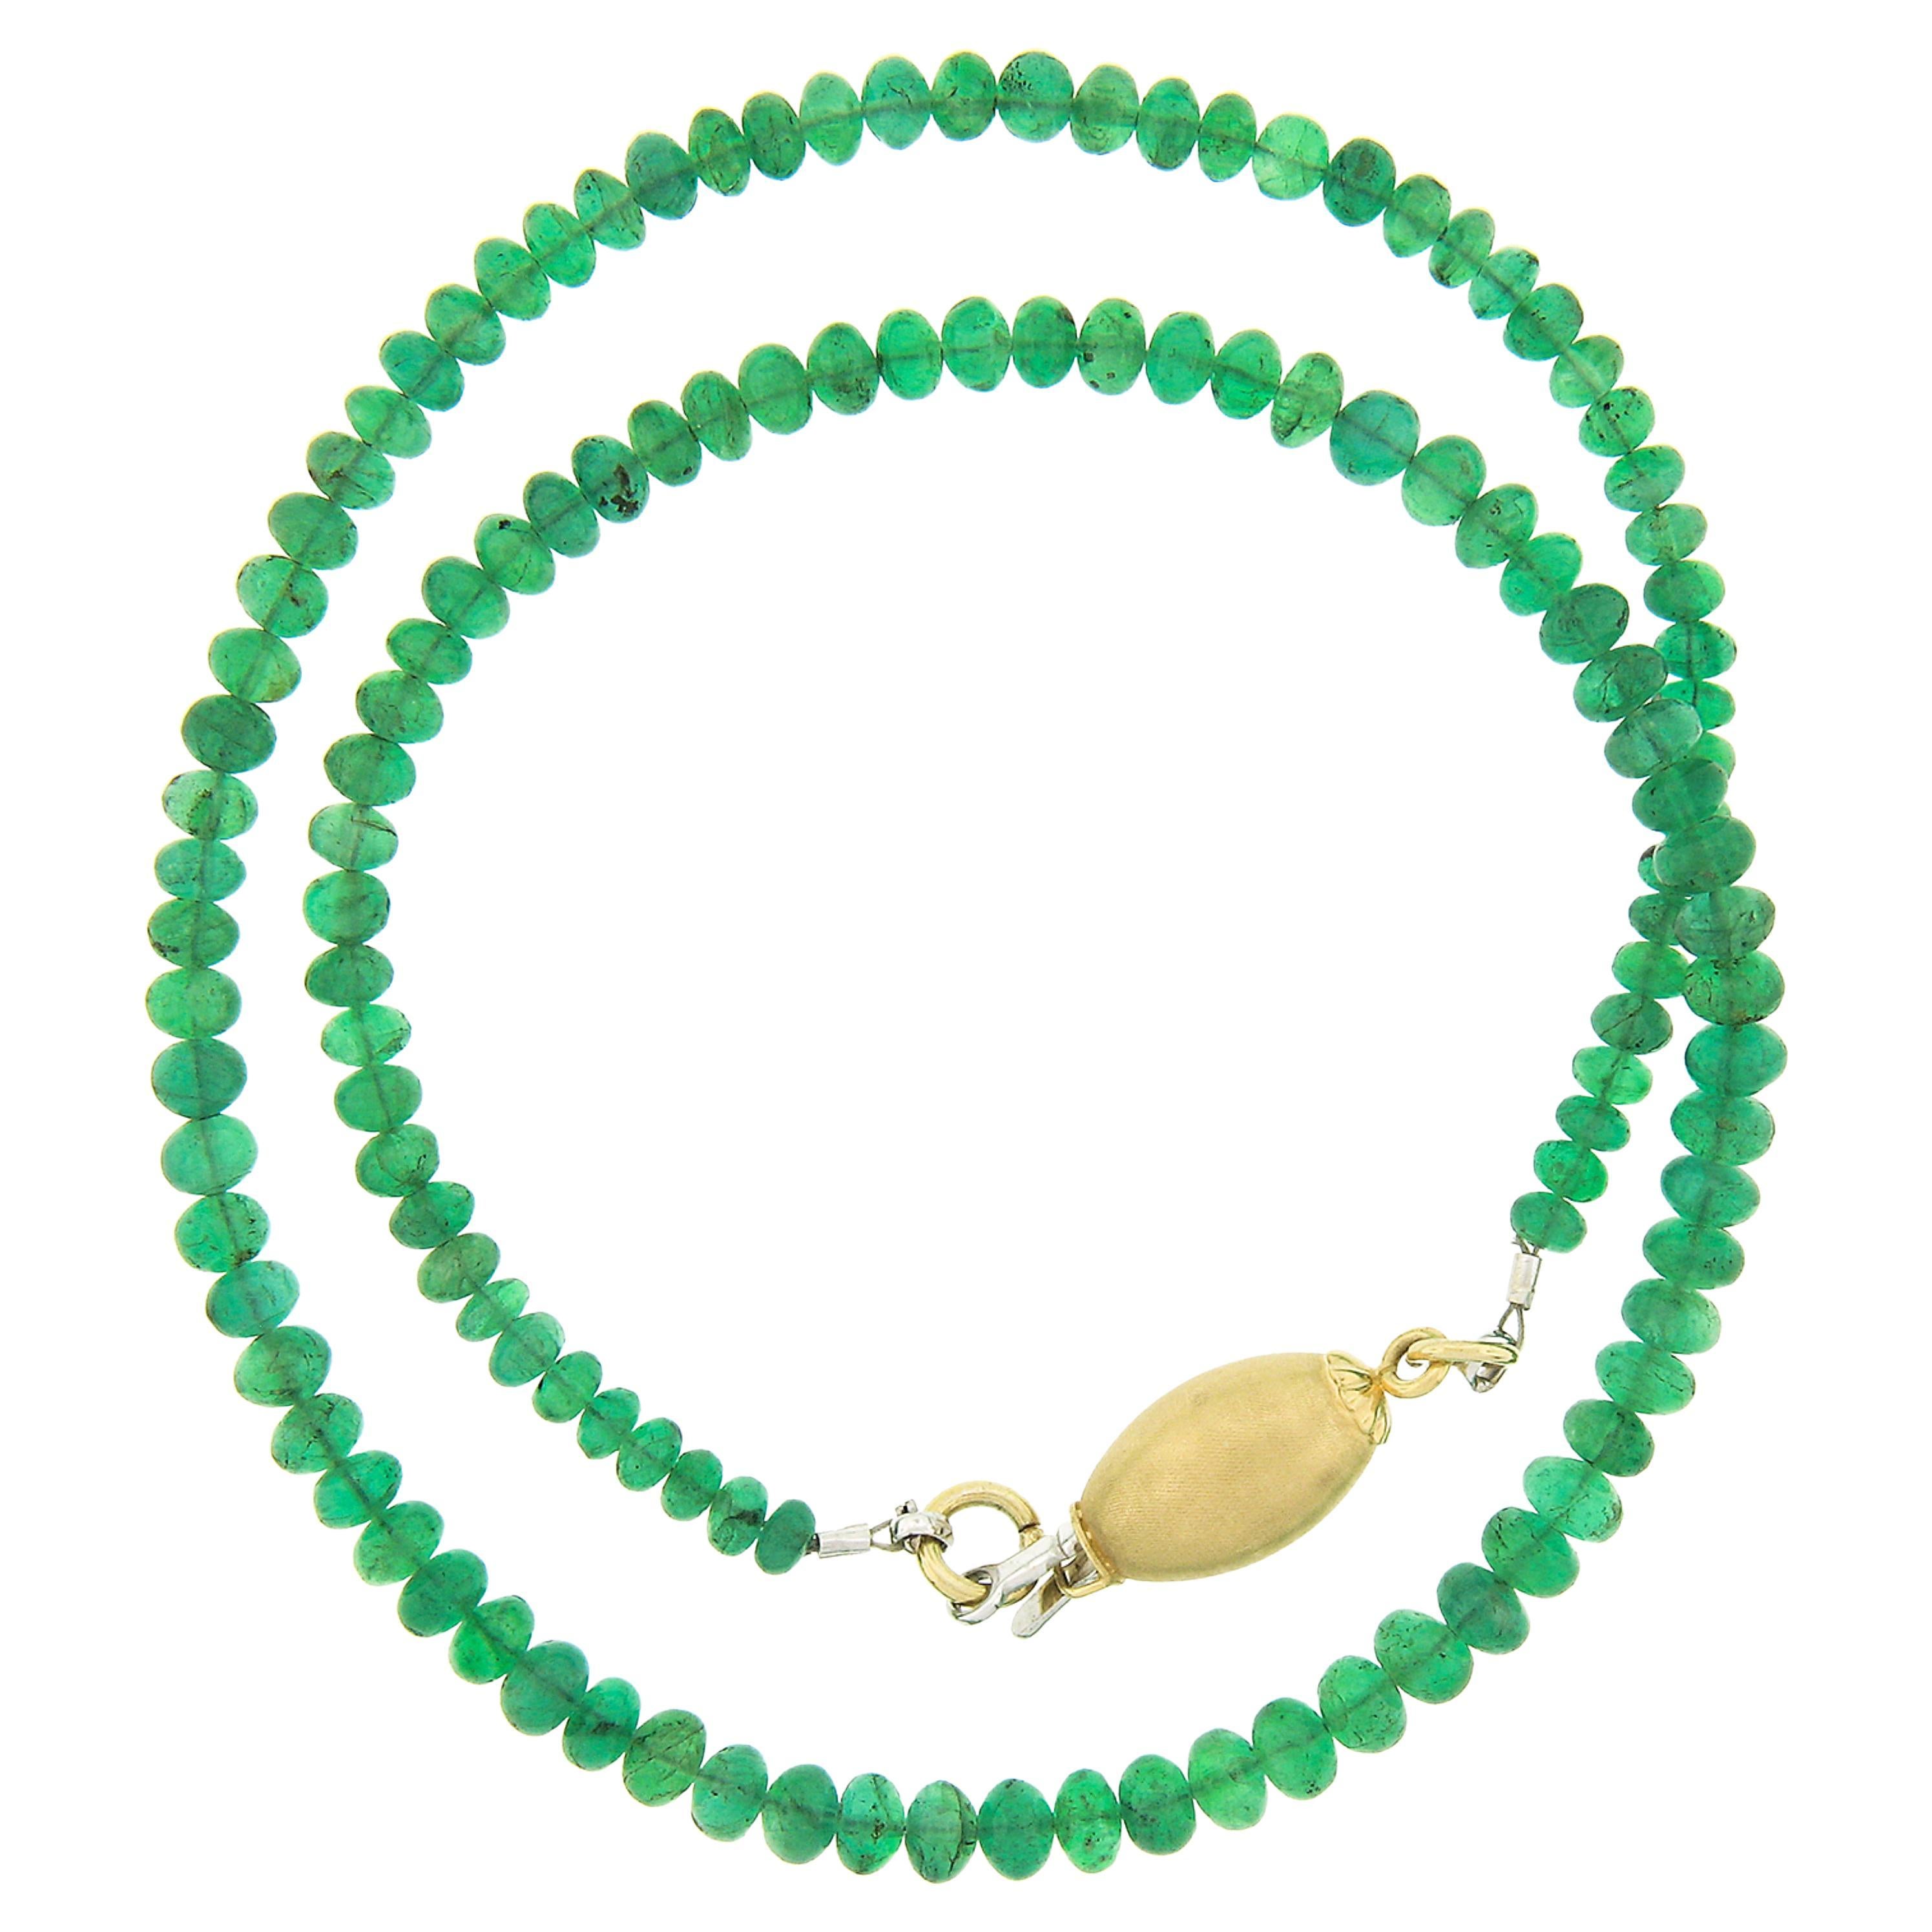 Vintage Rondelle Bead GIA Rich Green Emerald Strand Necklace 14k Gold Clasp